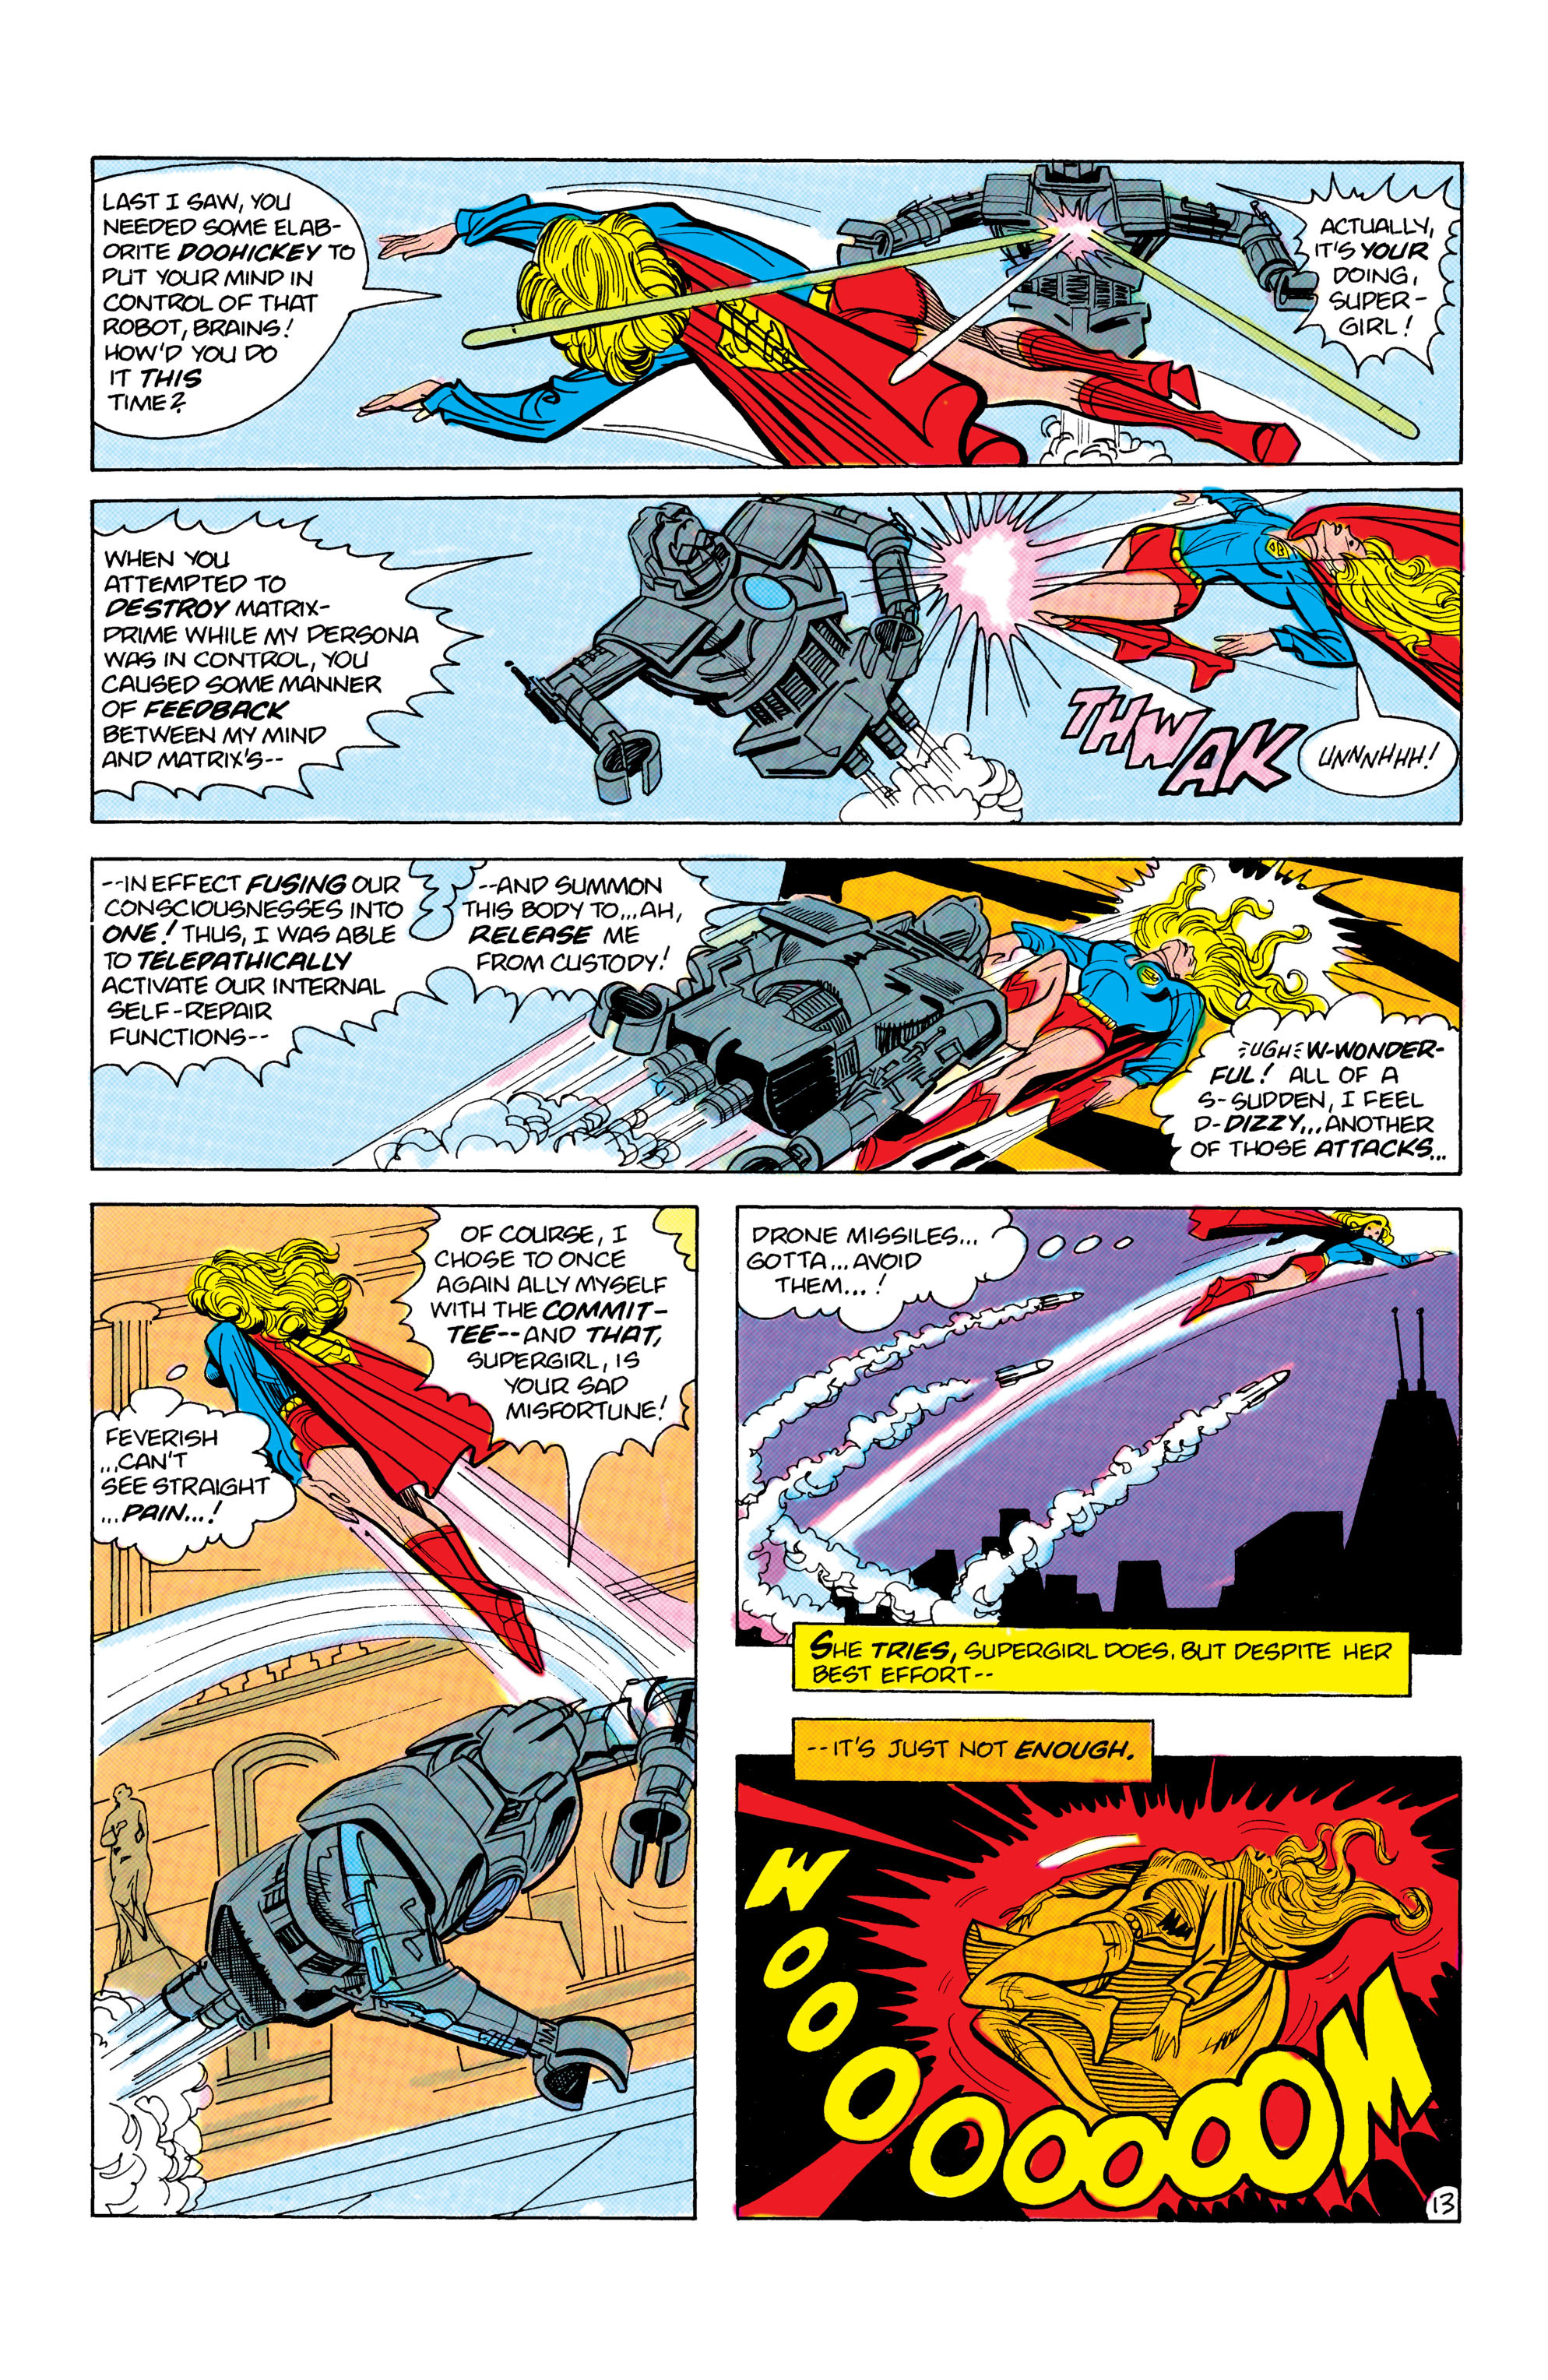 Supergirl (1982) 10 Page 13